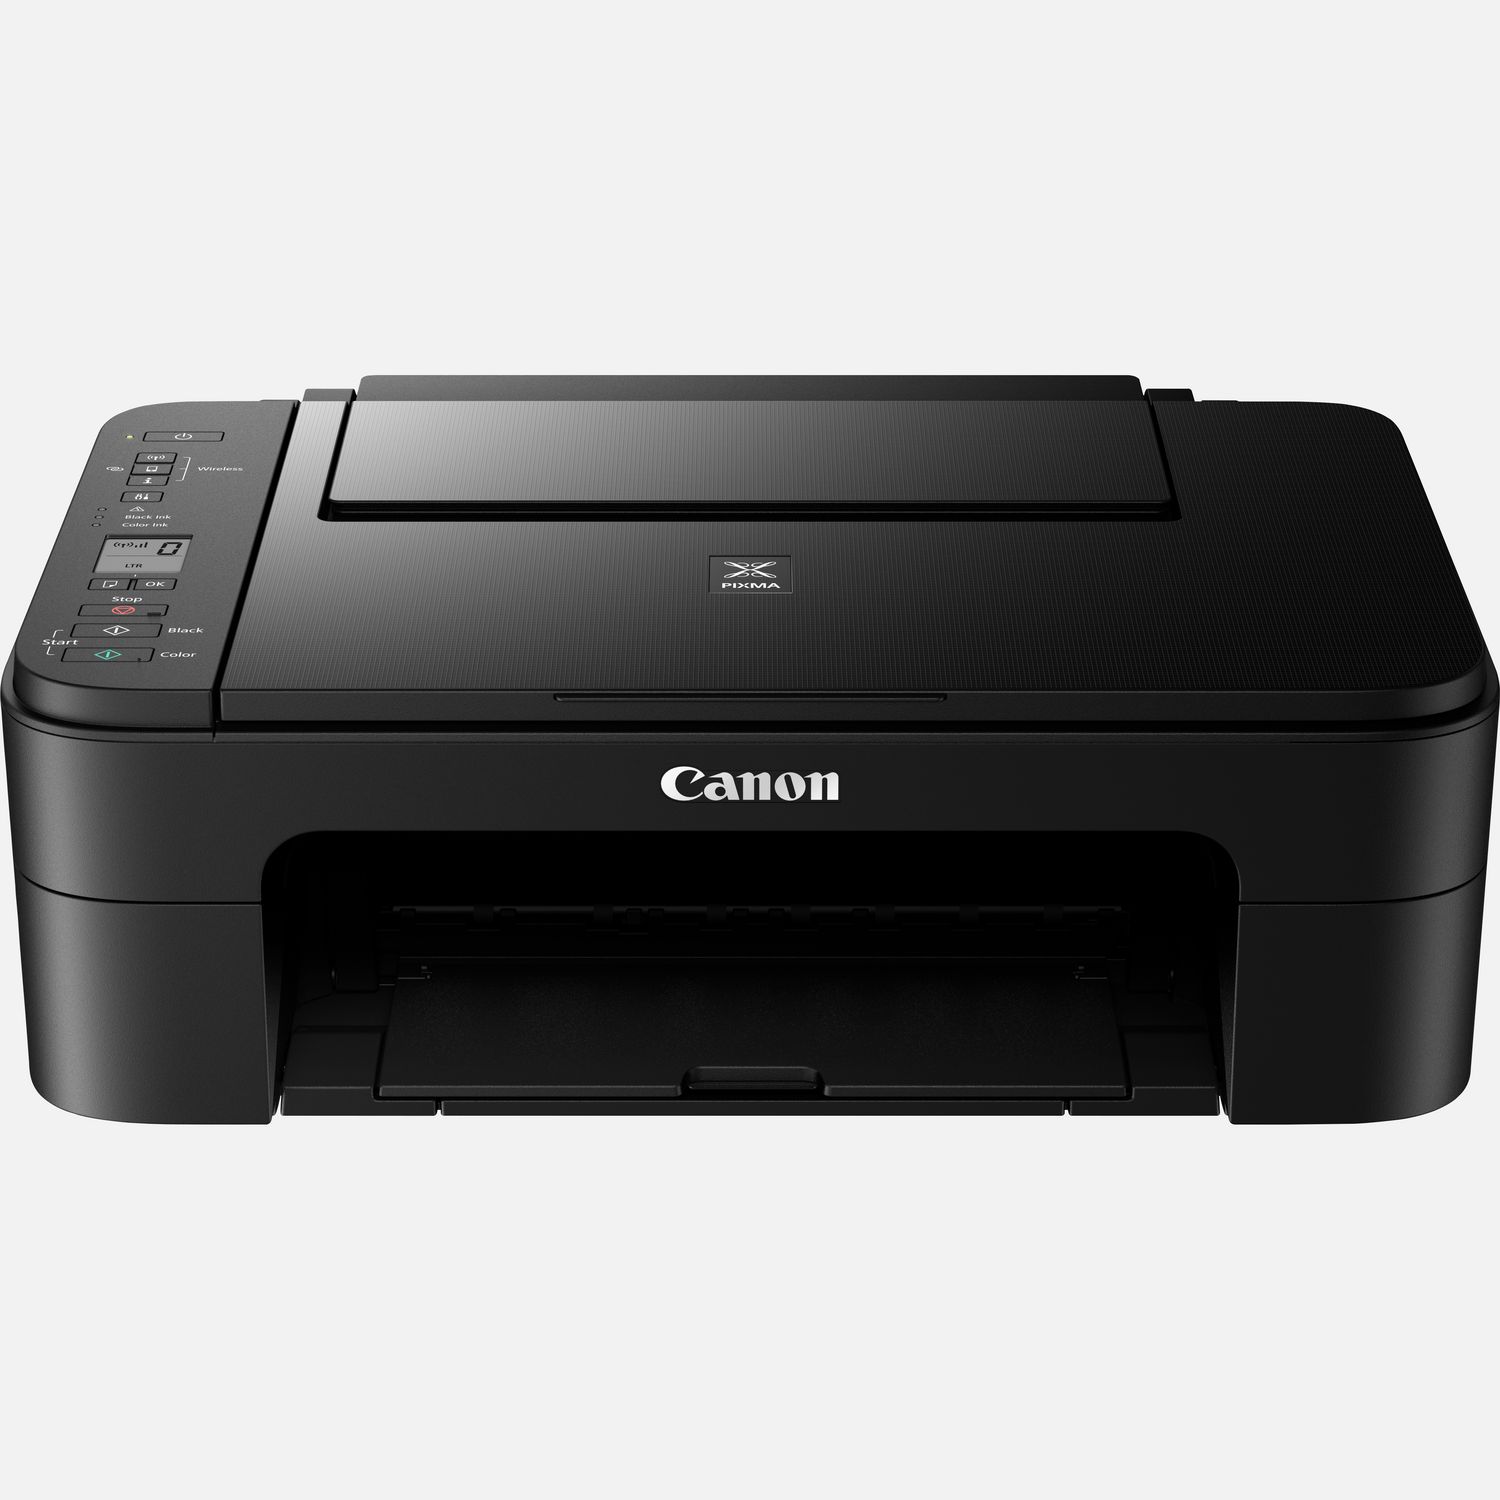 Print Speed up to 13.0 ipm in Black and 6.8 ipm in Color Canon PIXMA TS Series All-in-One Color Wireless Inkjet Printer Black 4FT Printer Cable Copier/Printer/Scanner Auto 2-Sided Printing 